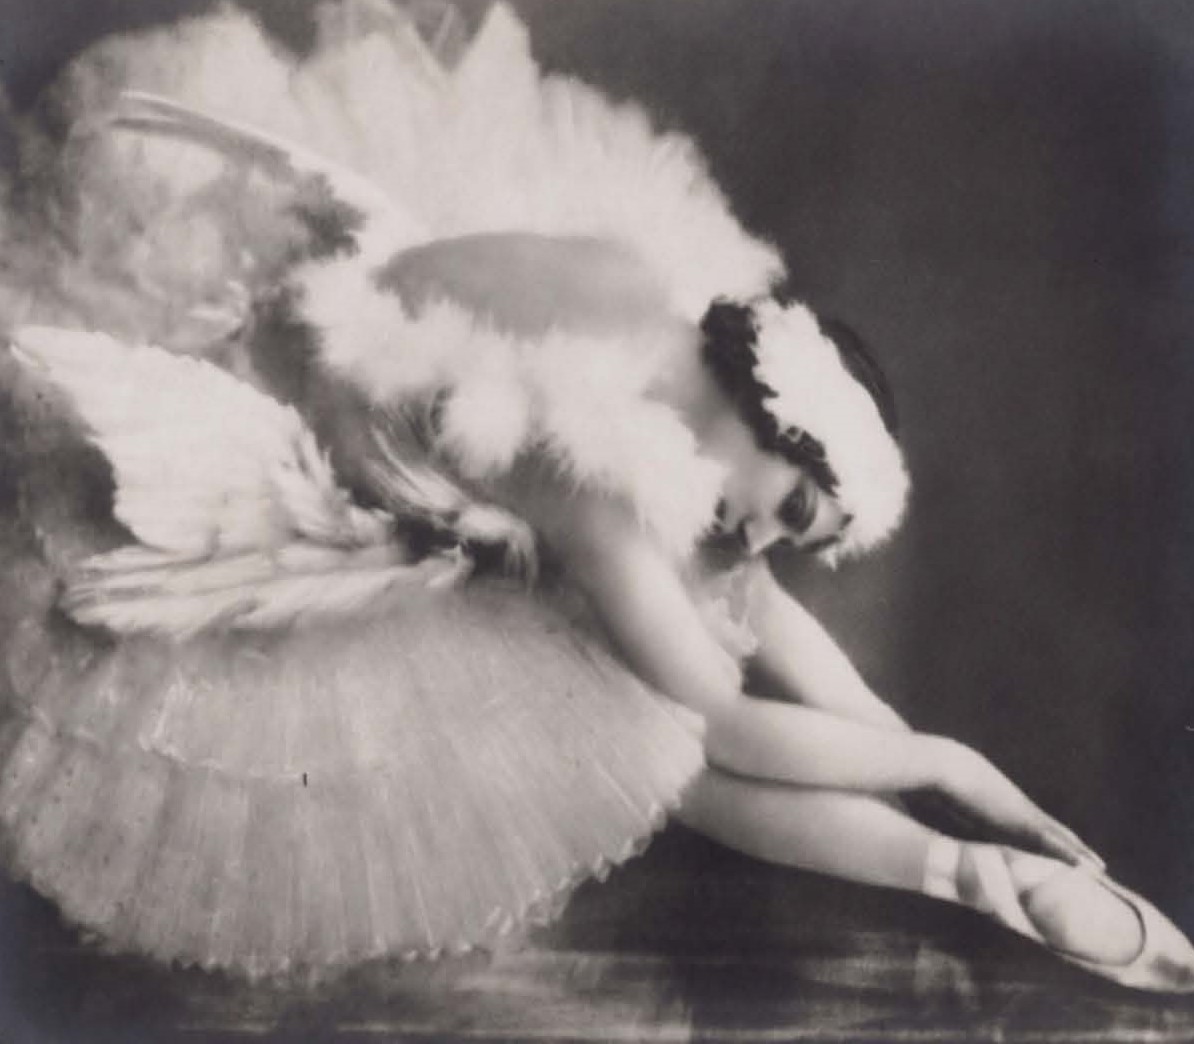 Figura 2: The Dying Swan (1928). Fonte: National Portrait Gallery, Londres